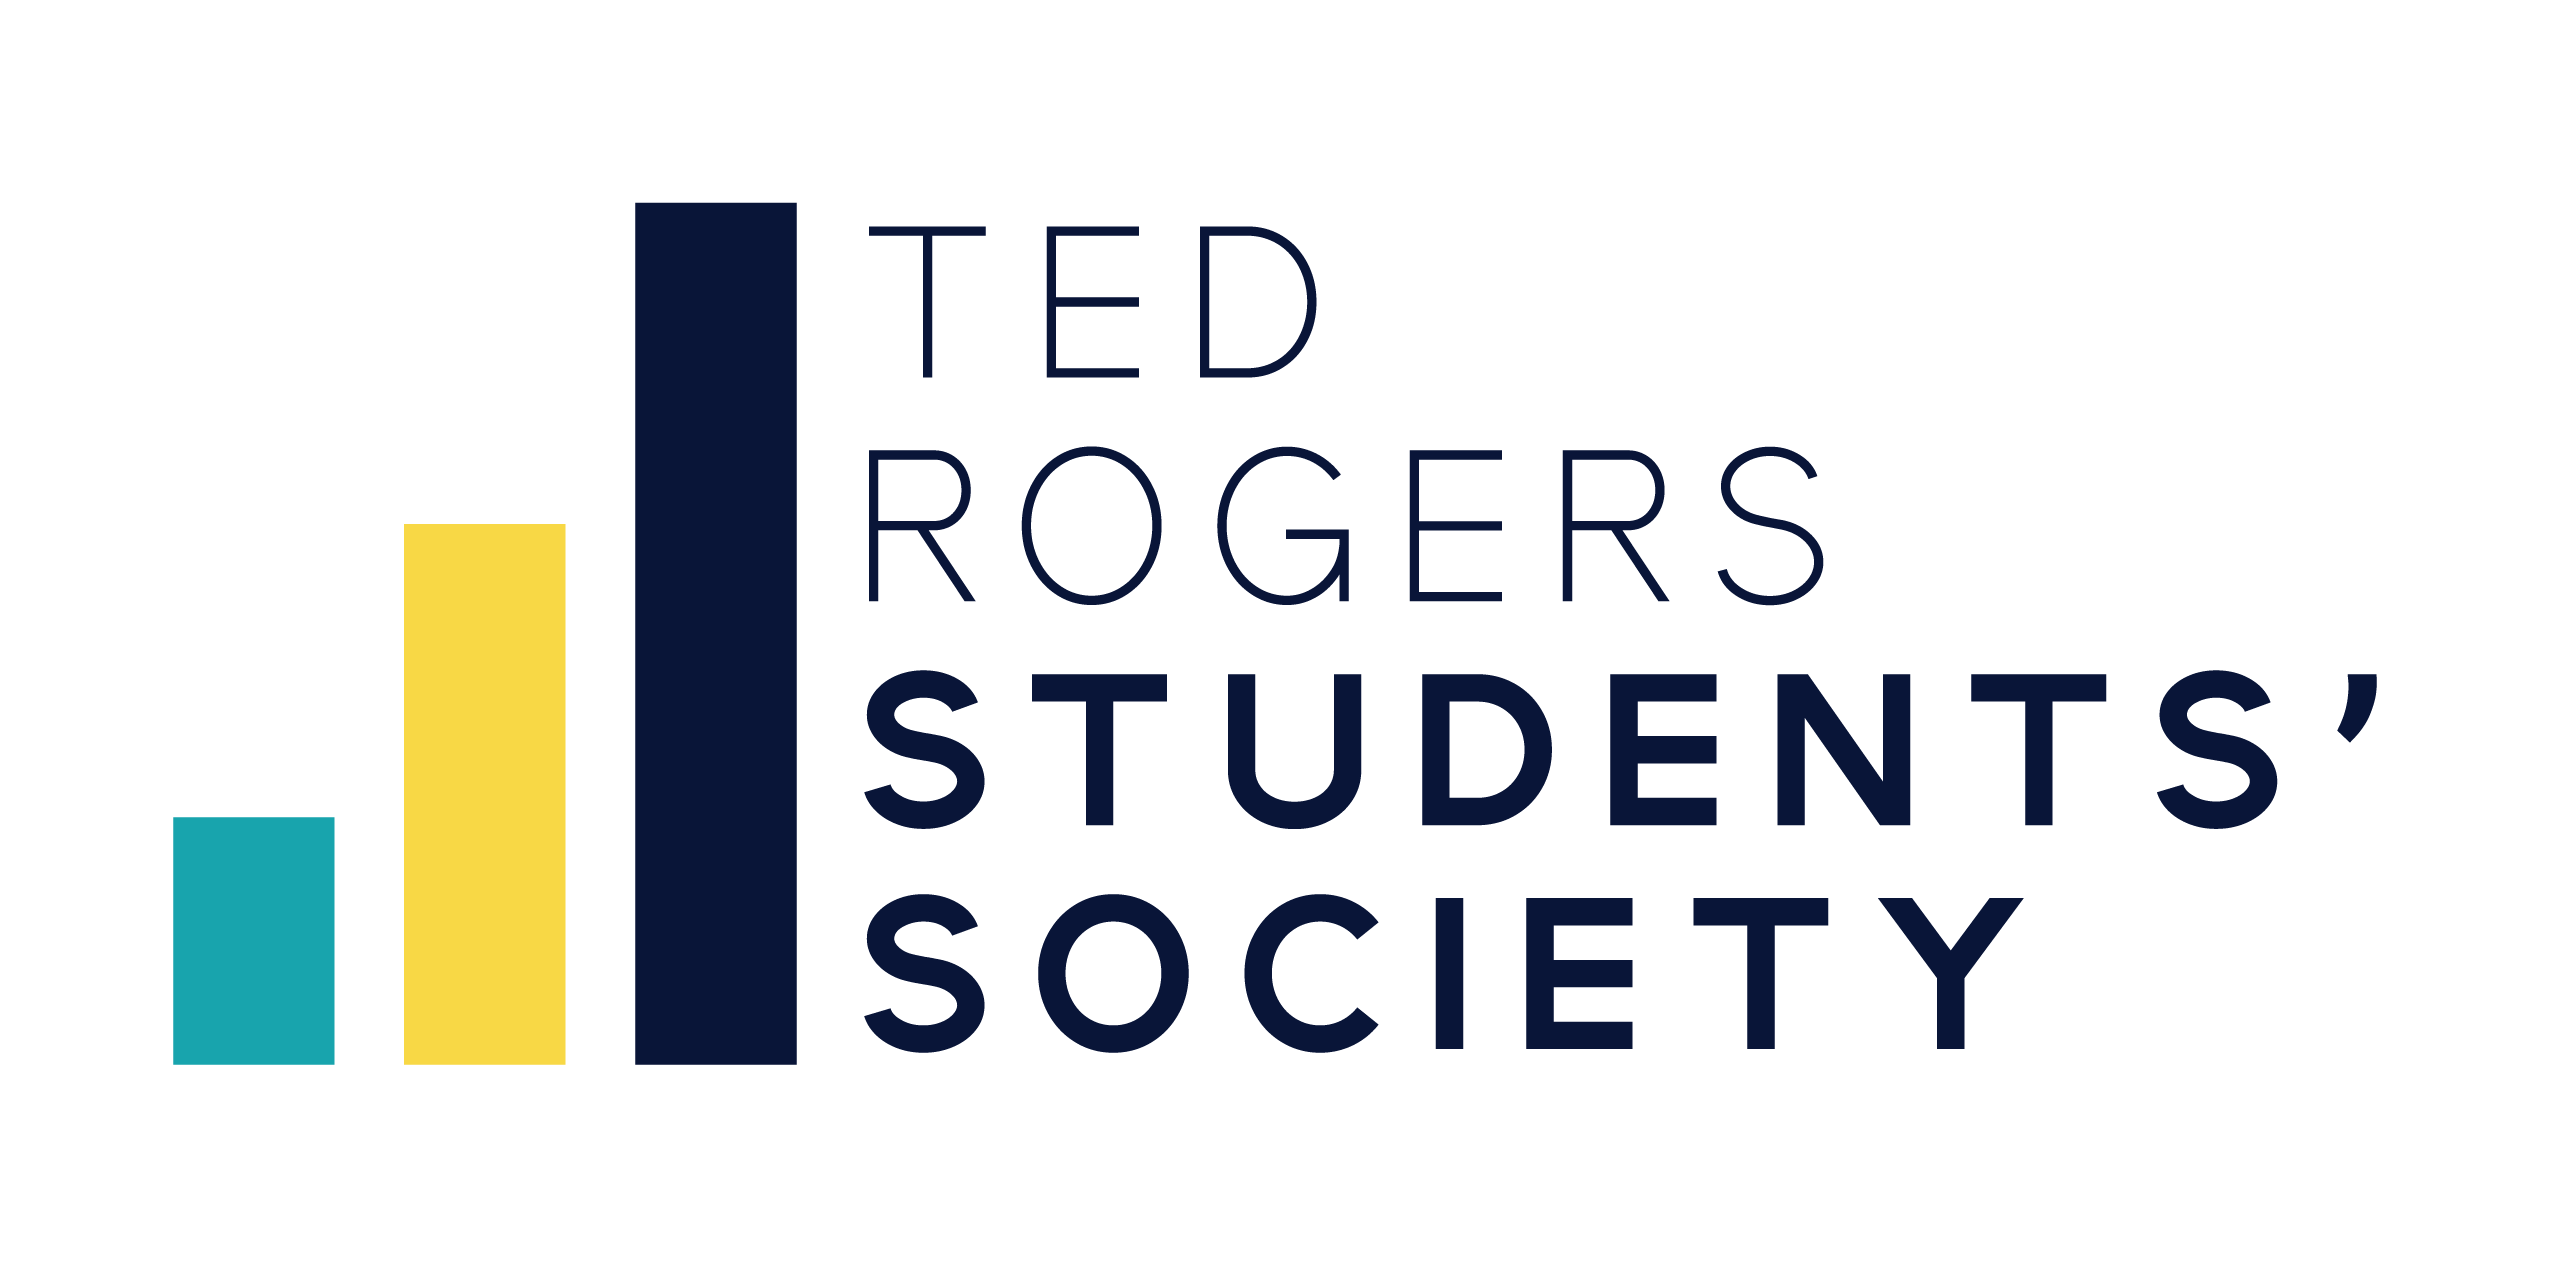 Ted Rogers Student Society logo